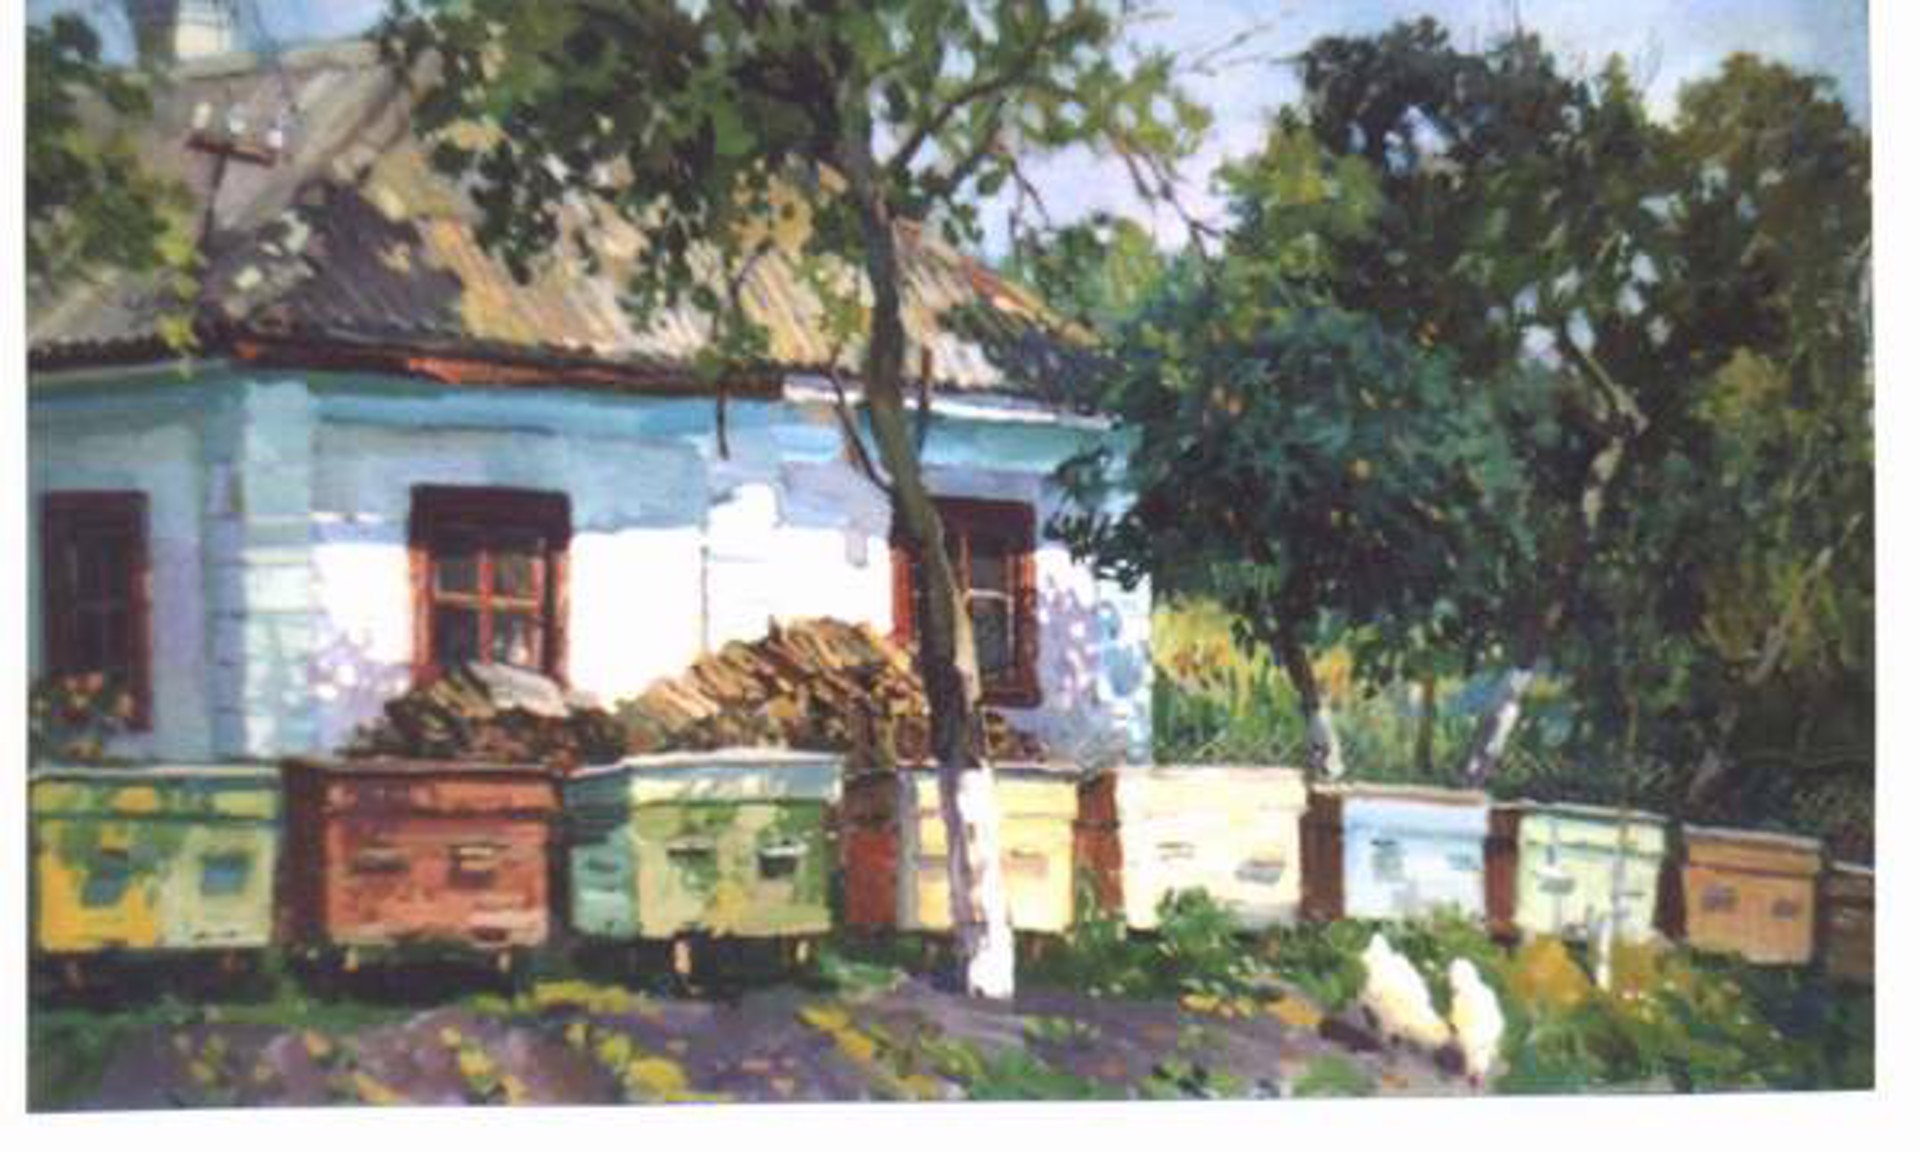 Hives in Front of the House by Ivan Vityuk